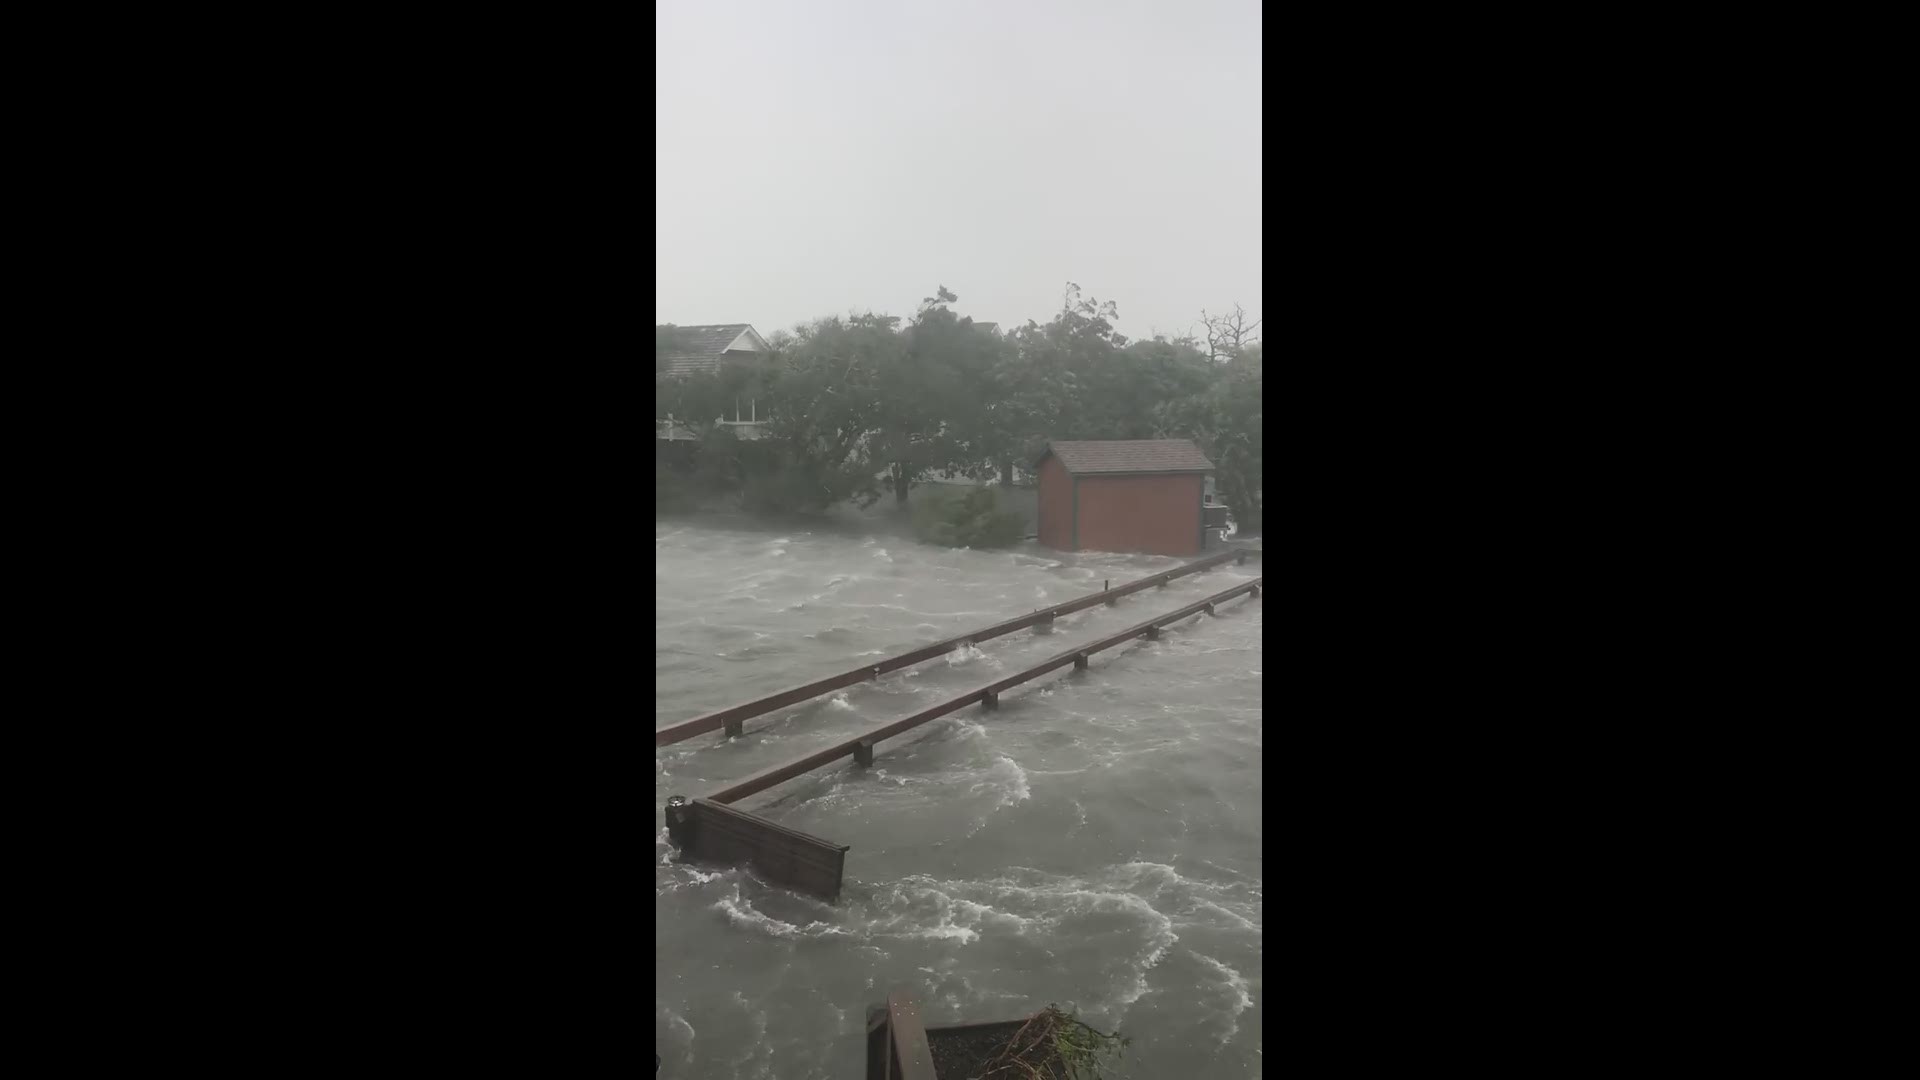 Darrin Callahan shared this video of flooding in Hatteras Village as Dorian made its trek over the Outer Banks of North Carolina on Friday.